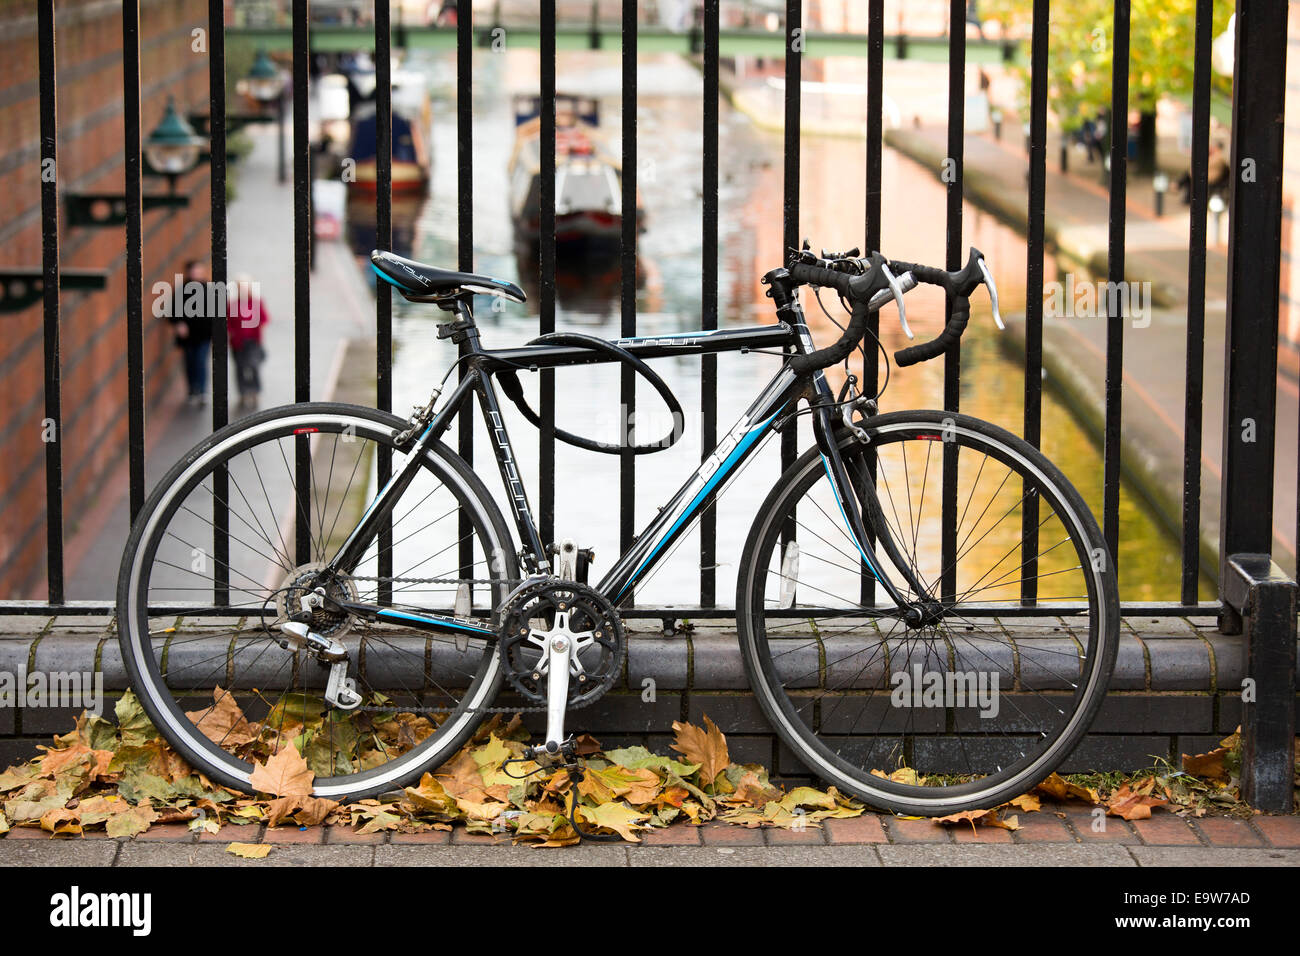 A bicycle chained to railings on Broad Street, Birmingham, overlooking Brindleyplace canal Stock Photo